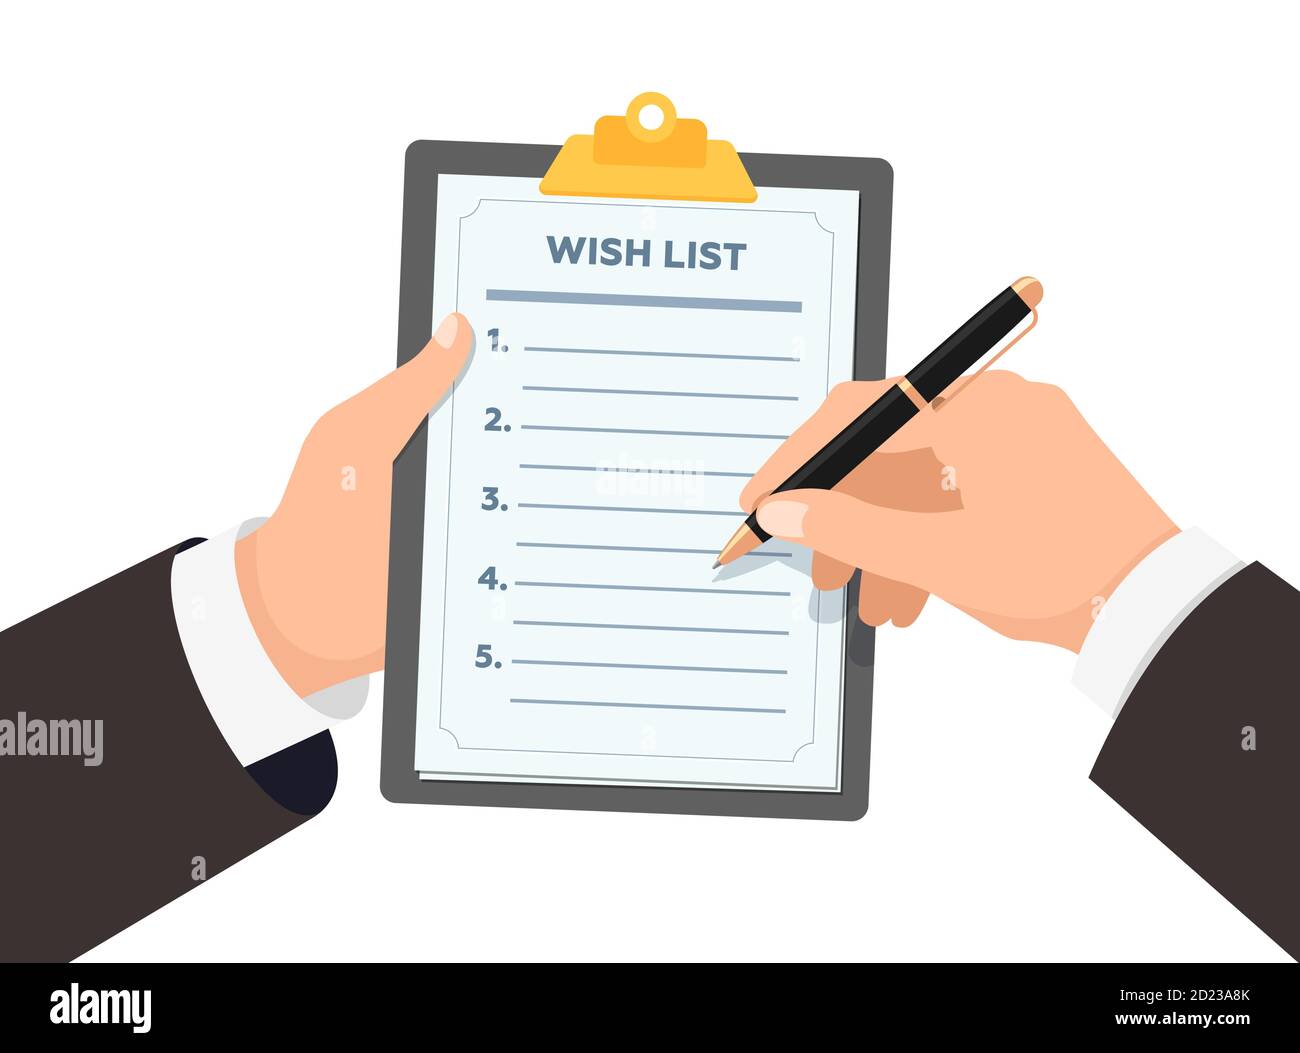 Businessman hands holding clipboard with wish list. Business man with pen writes down wishes on paper wishlist form flat eps vector illustration Stock Vector